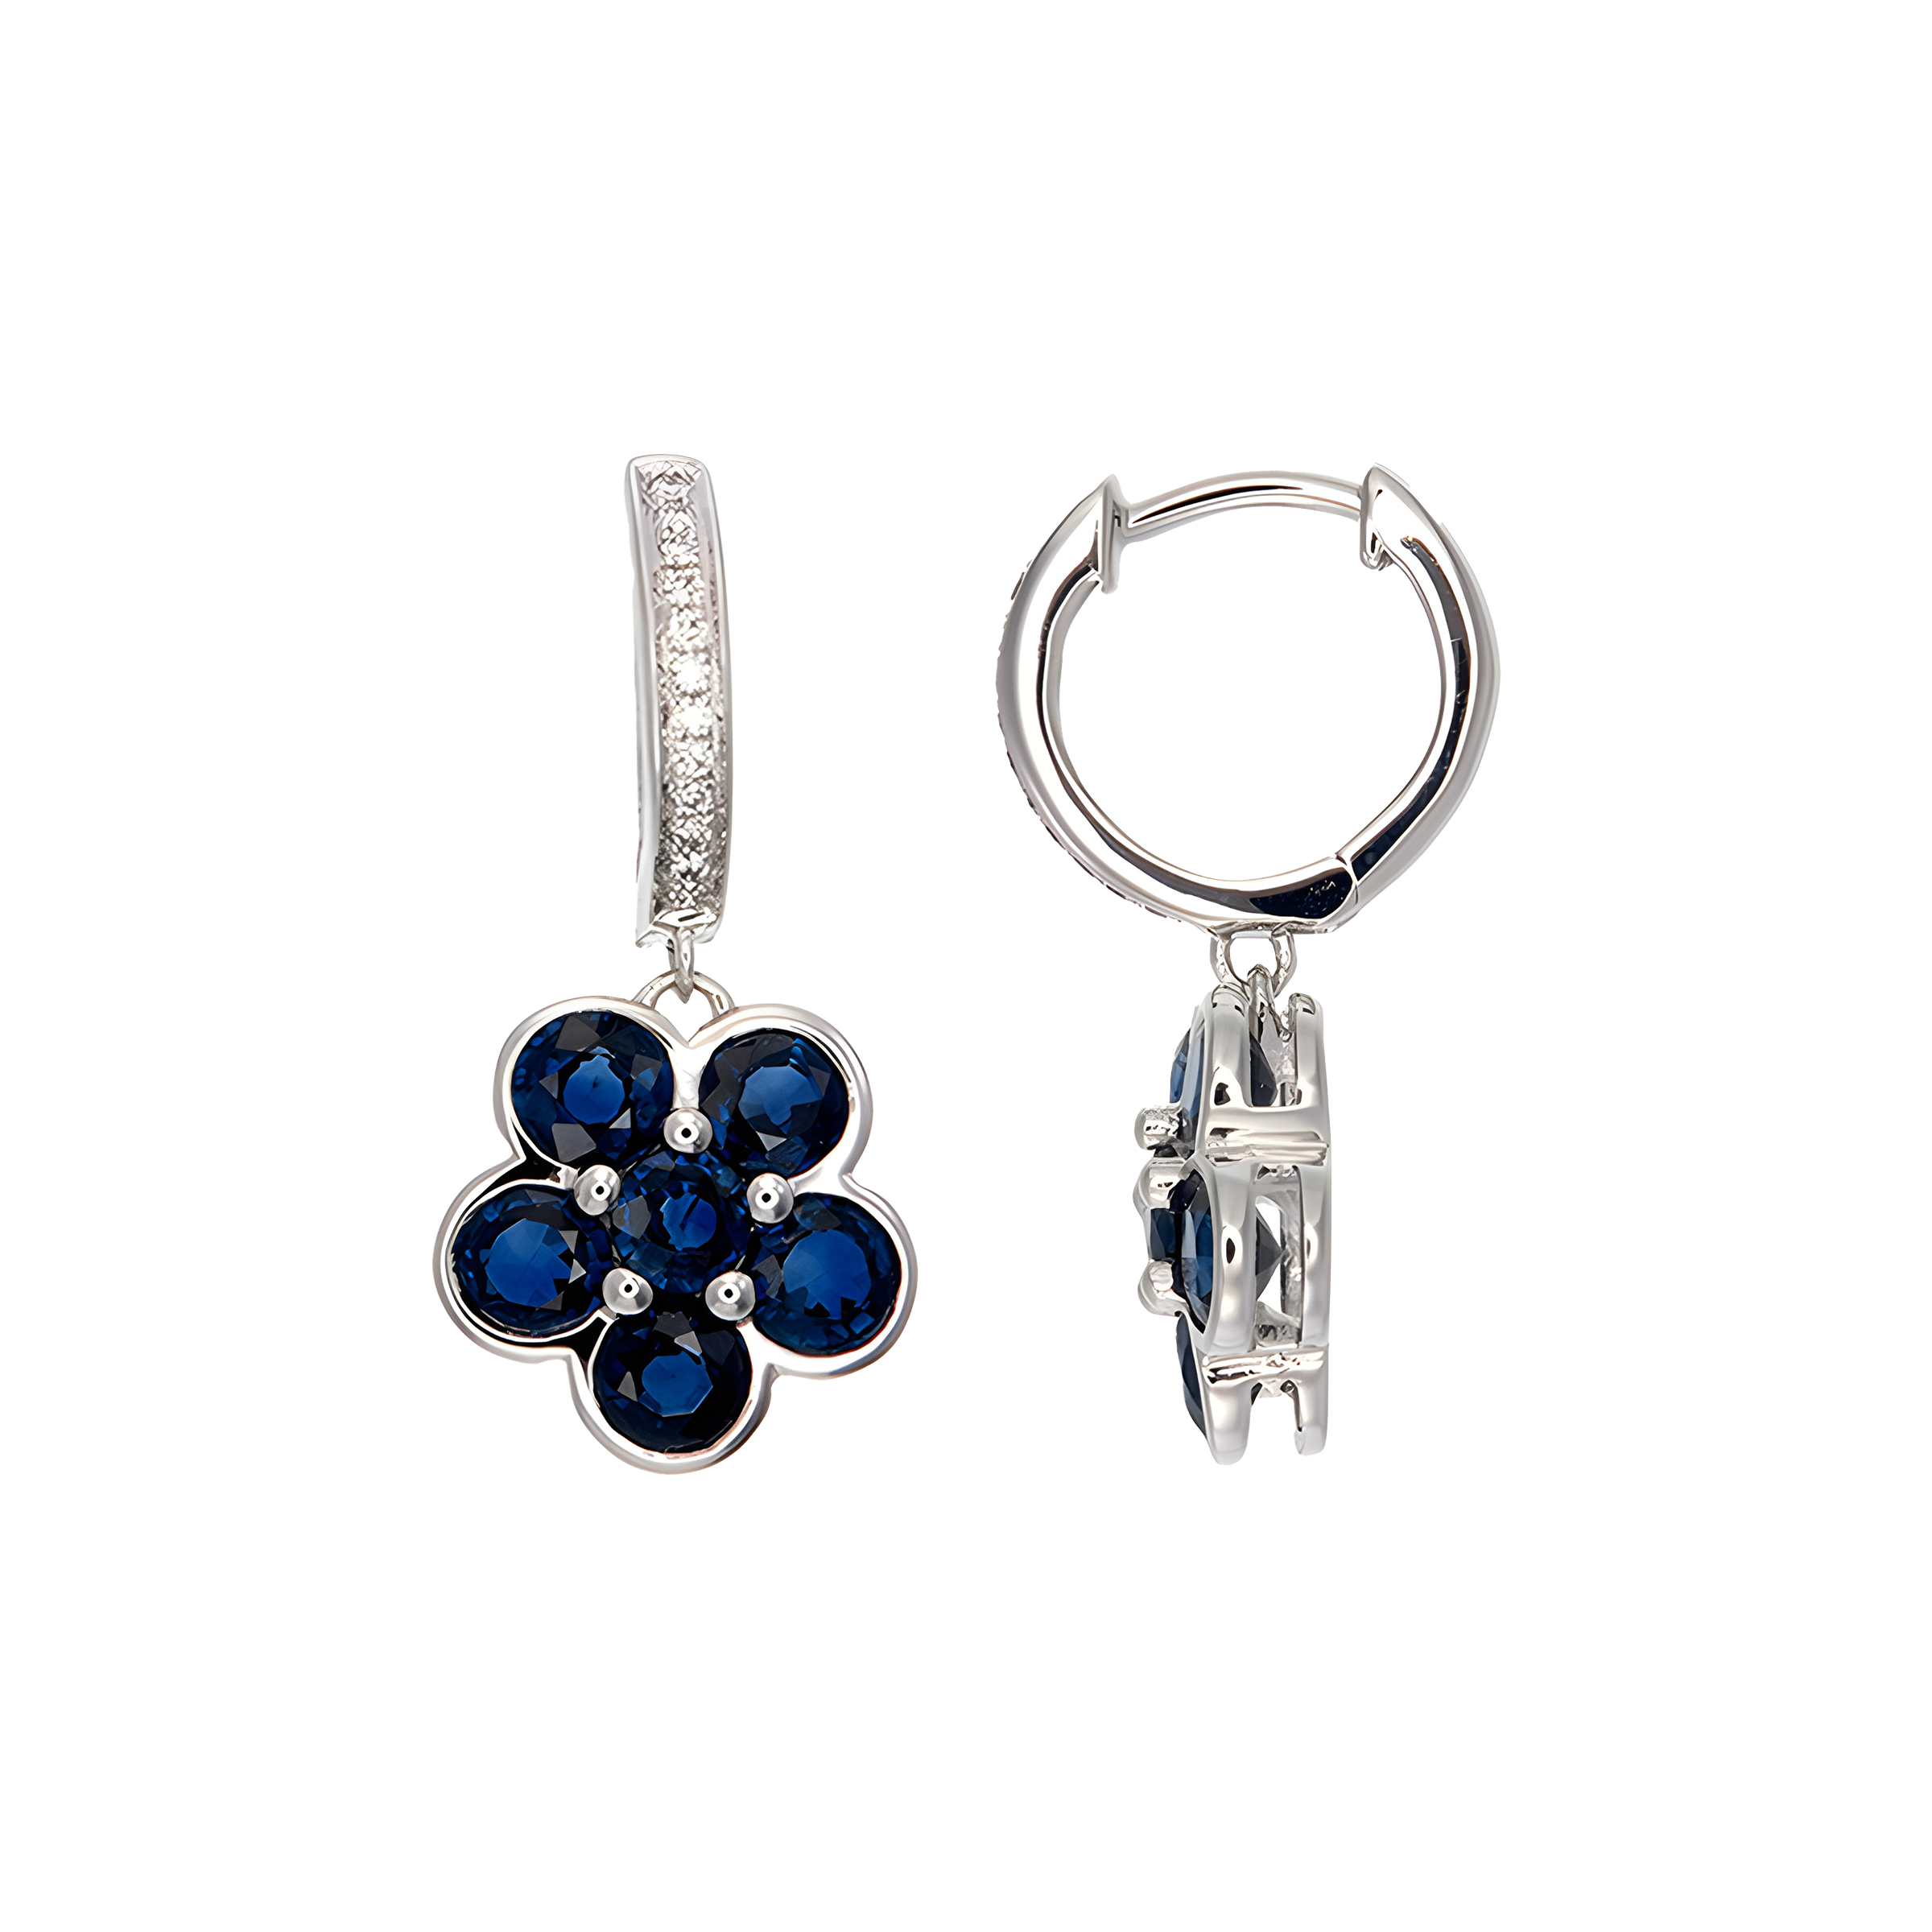 Sapphire and Diamond Floral Cluster Drop Earrings in 18k White Gold